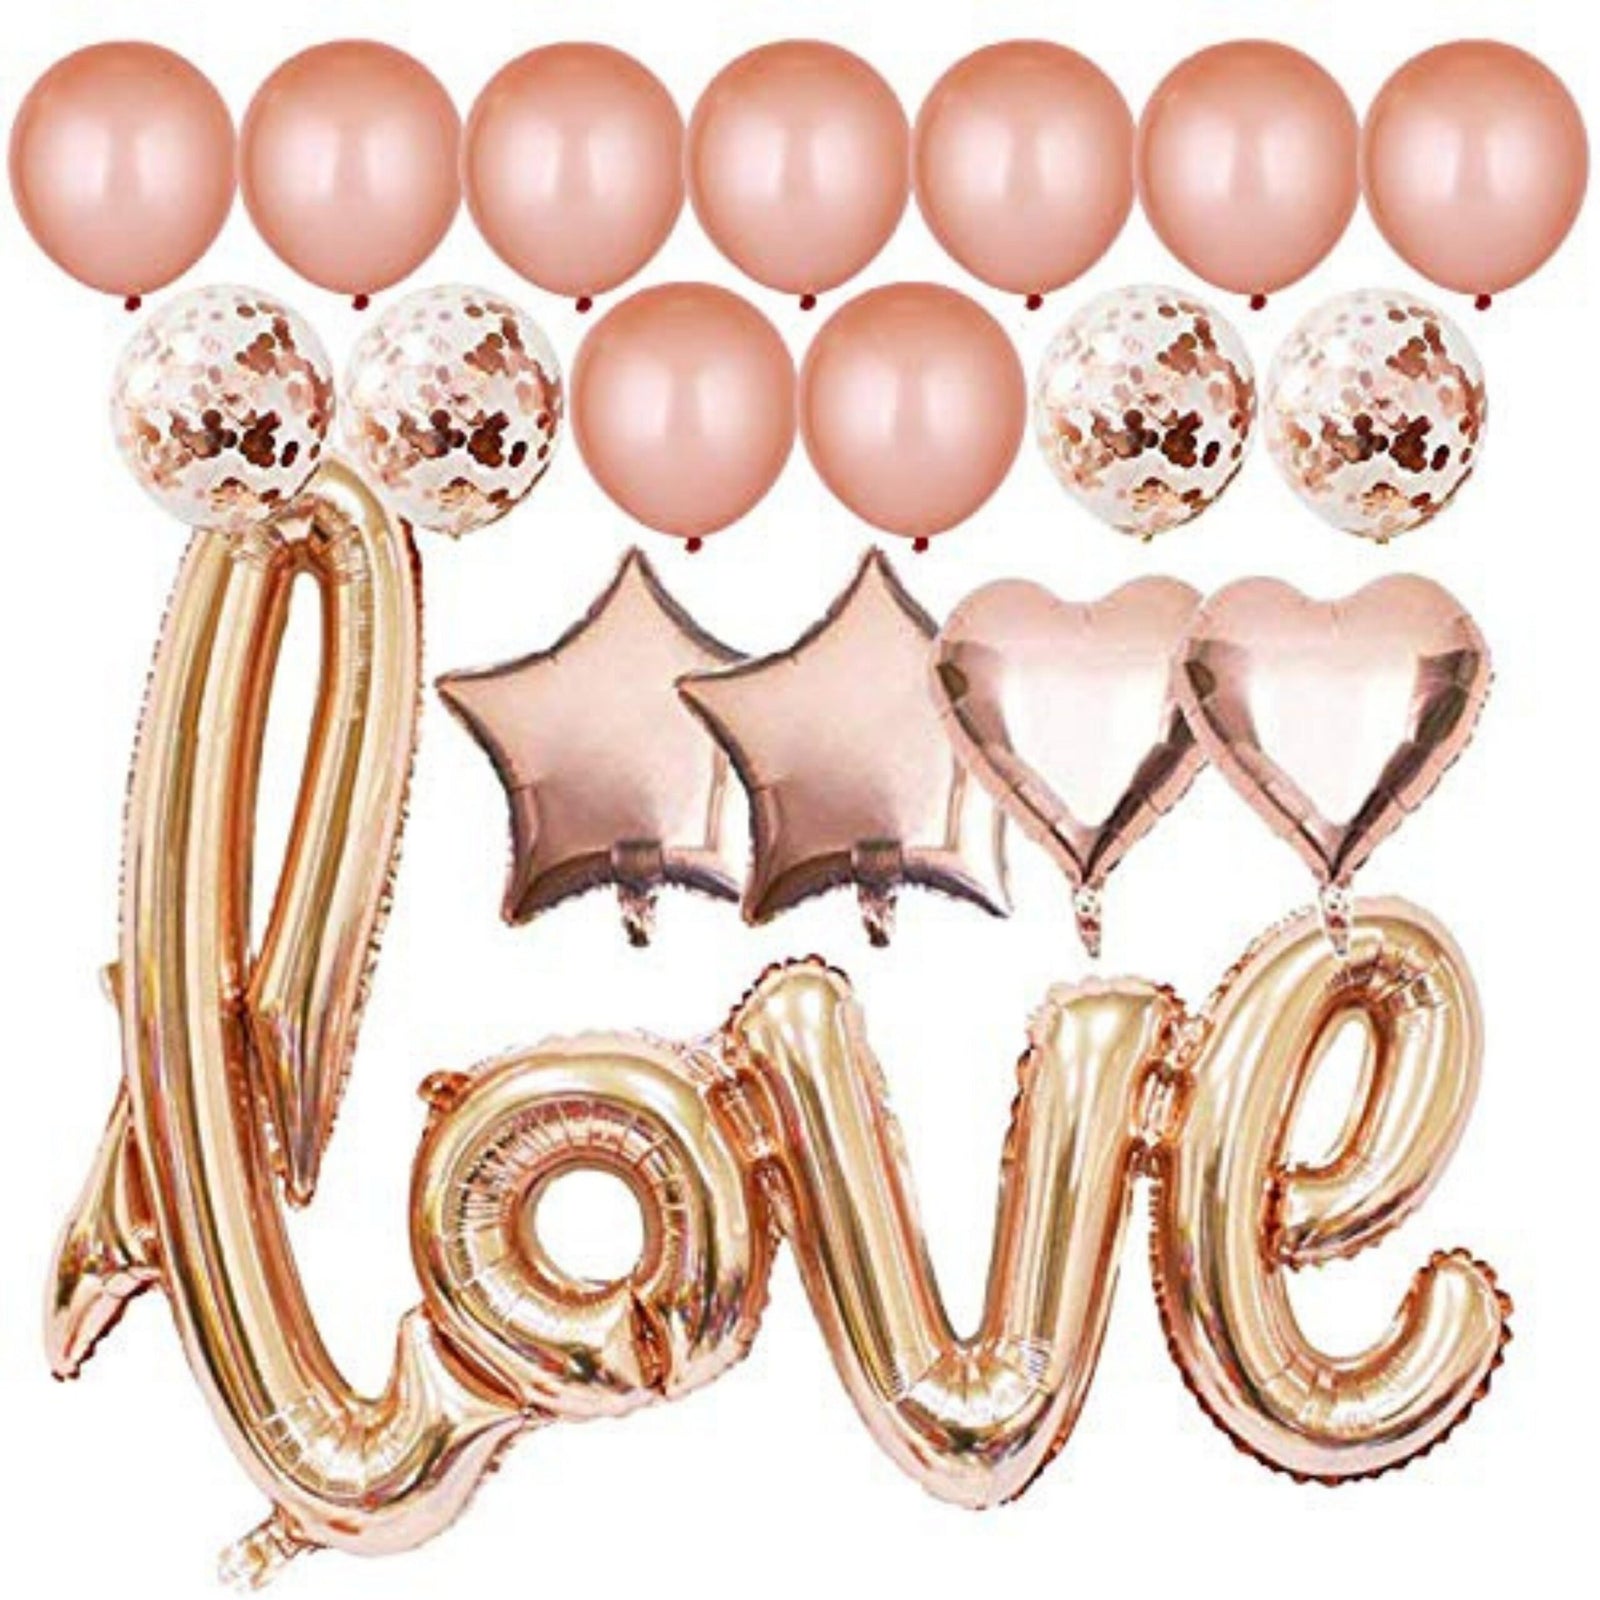 Love Shape Letter Foil Balloon with Rose Gold Confetti and Rose Gold Metallic Balloons for Birthday Wedding Valentine Day Engagement Party (20 piece)